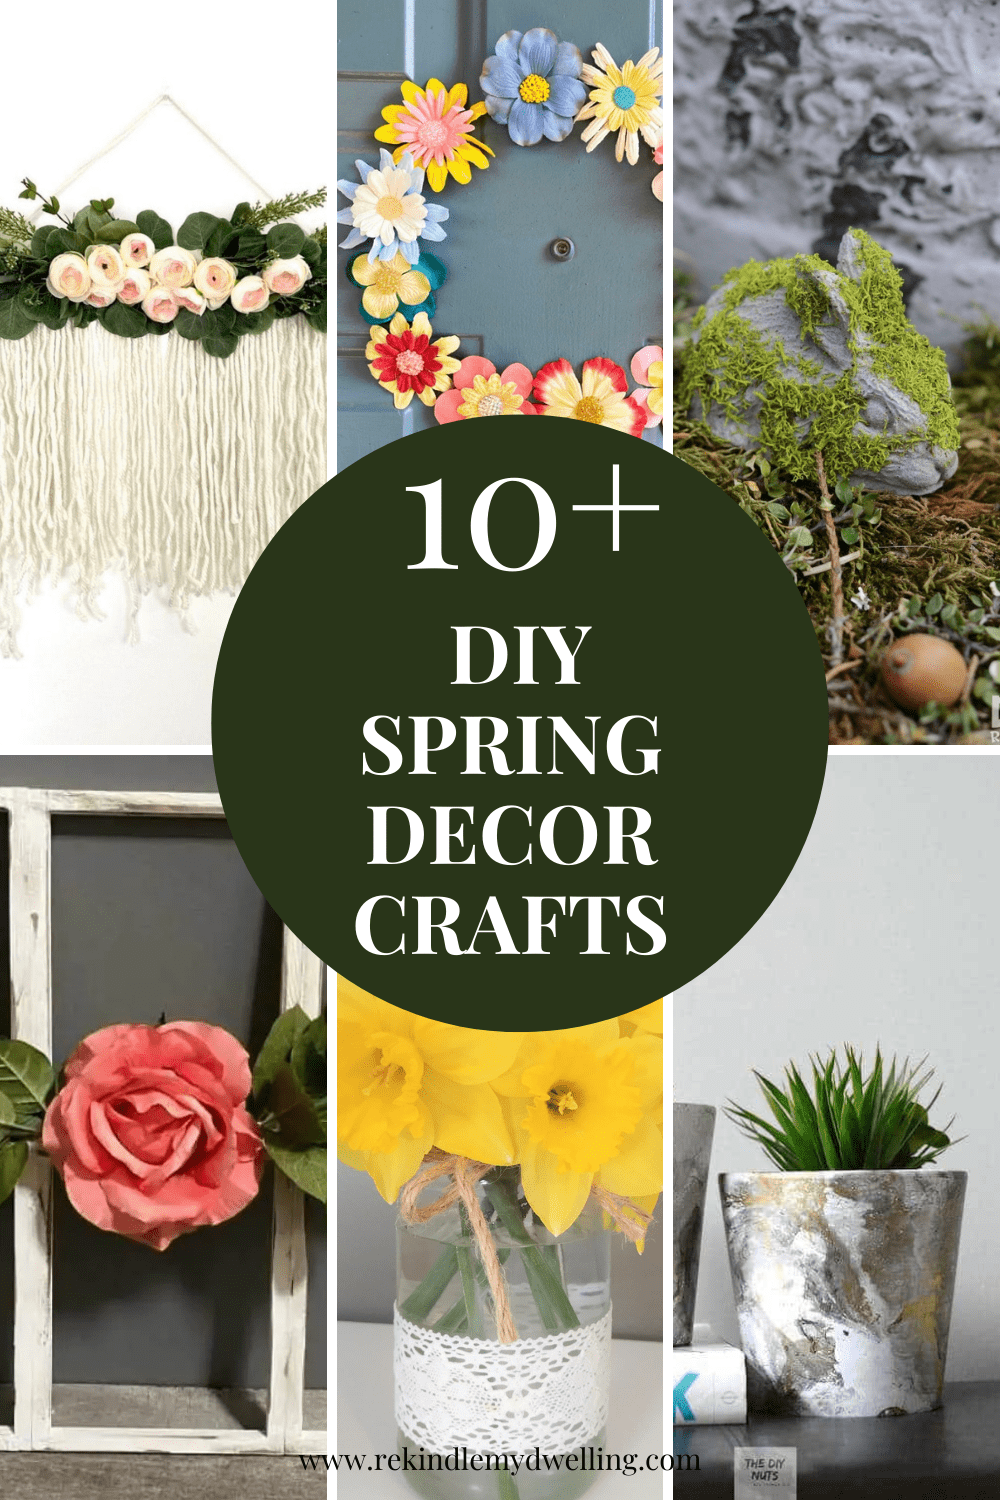 Collage of spring decor crafts for adults with text overlay.